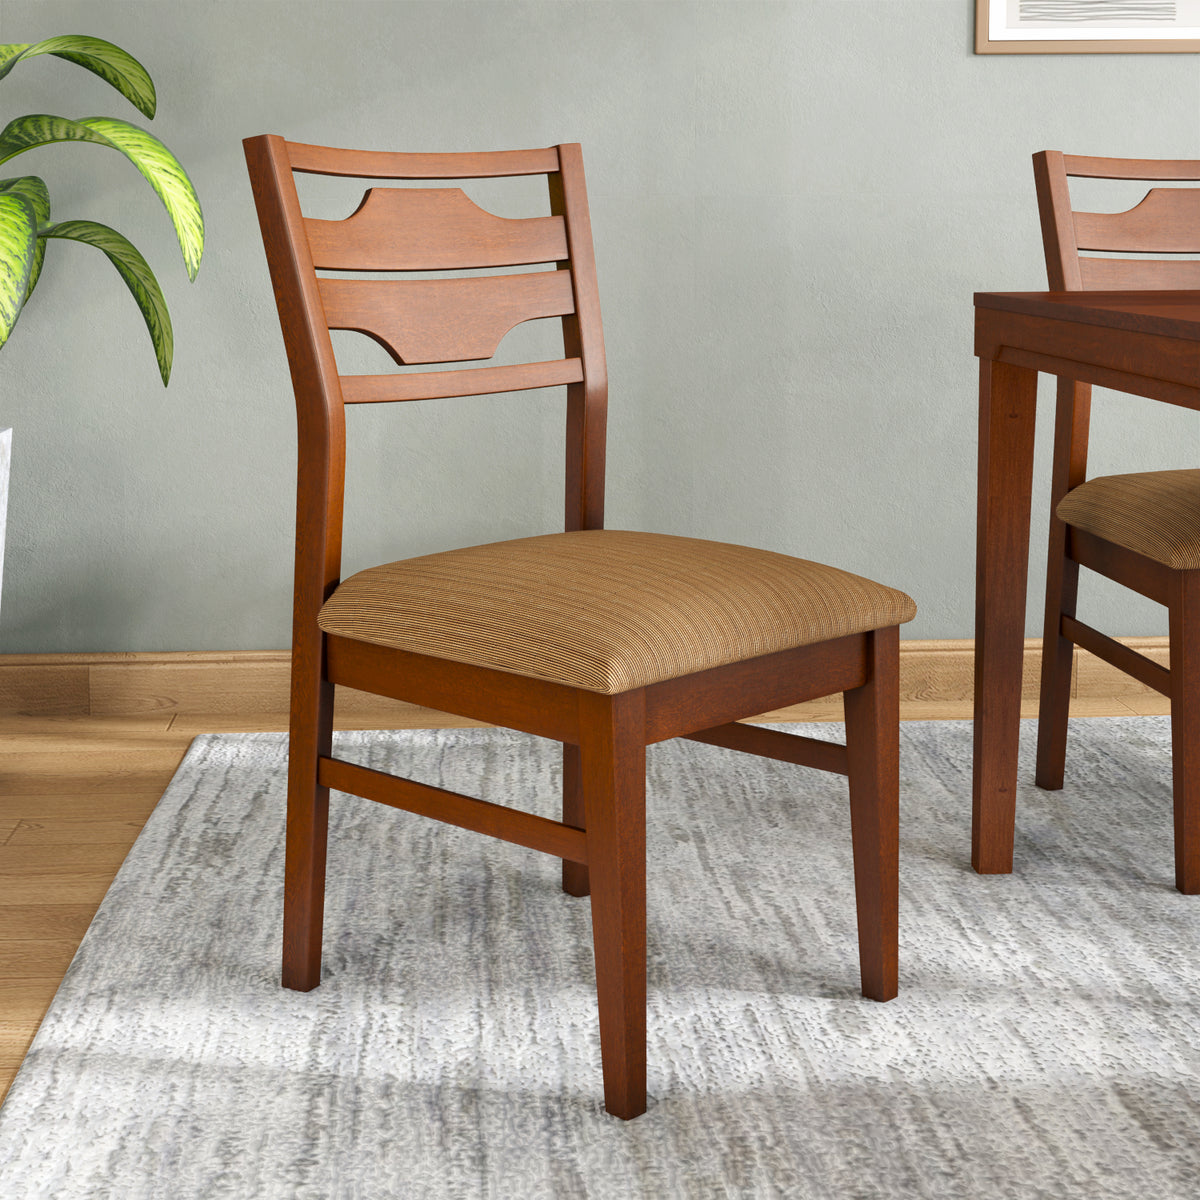 Holls Dining Chair In Beige by Olliix